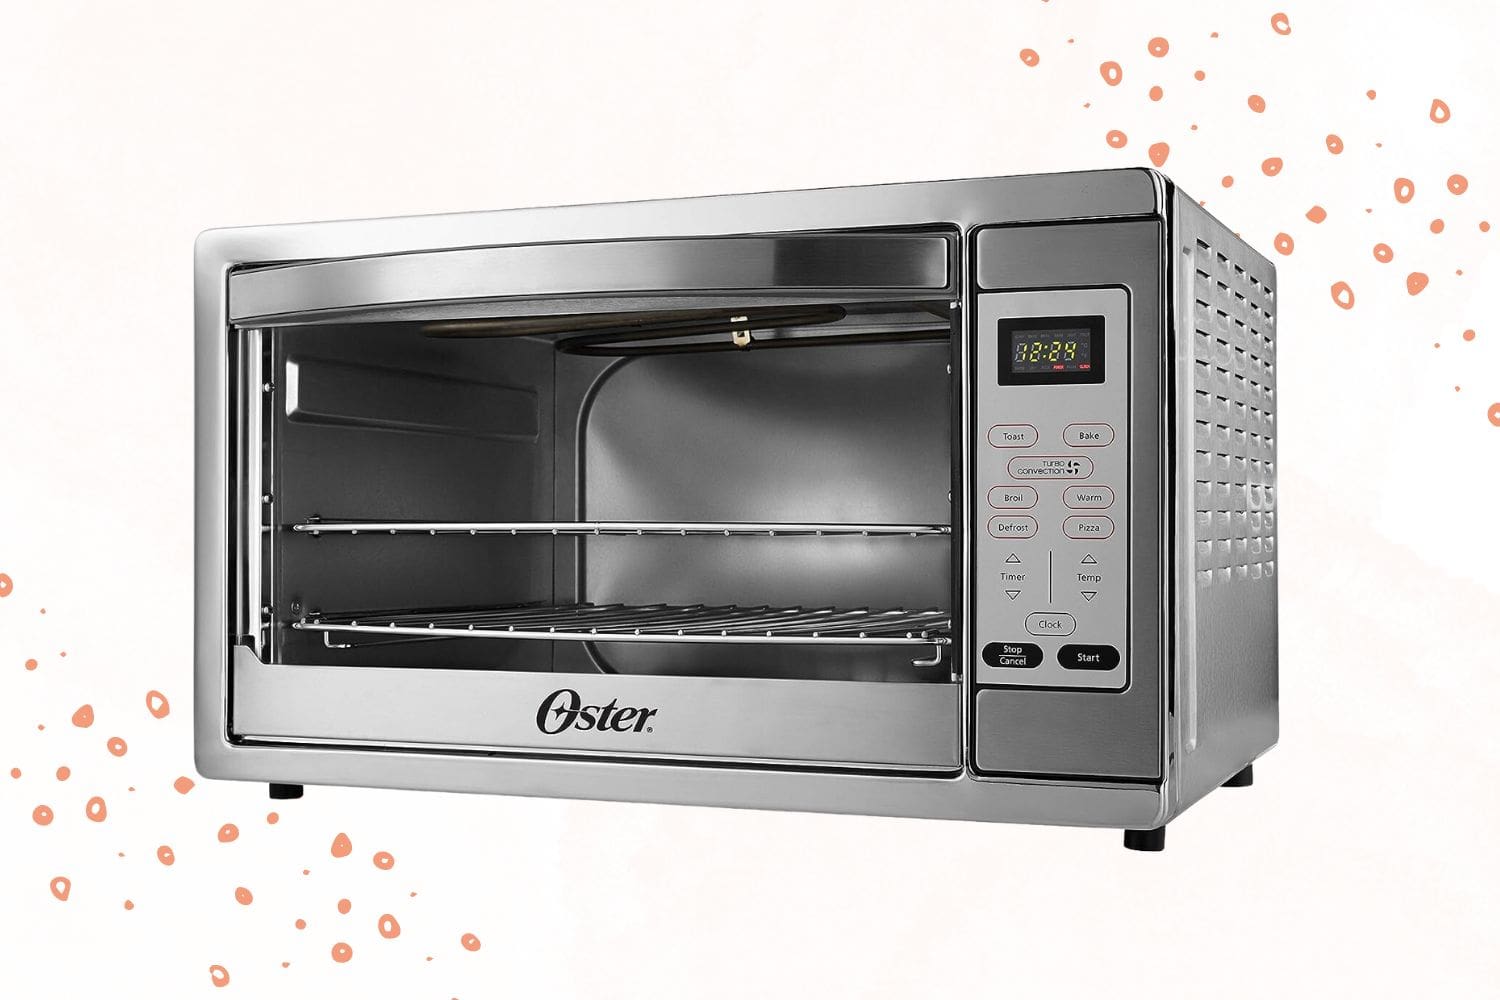 Oster Toaster Oven, 7-in-1 Countertop Toaster Oven